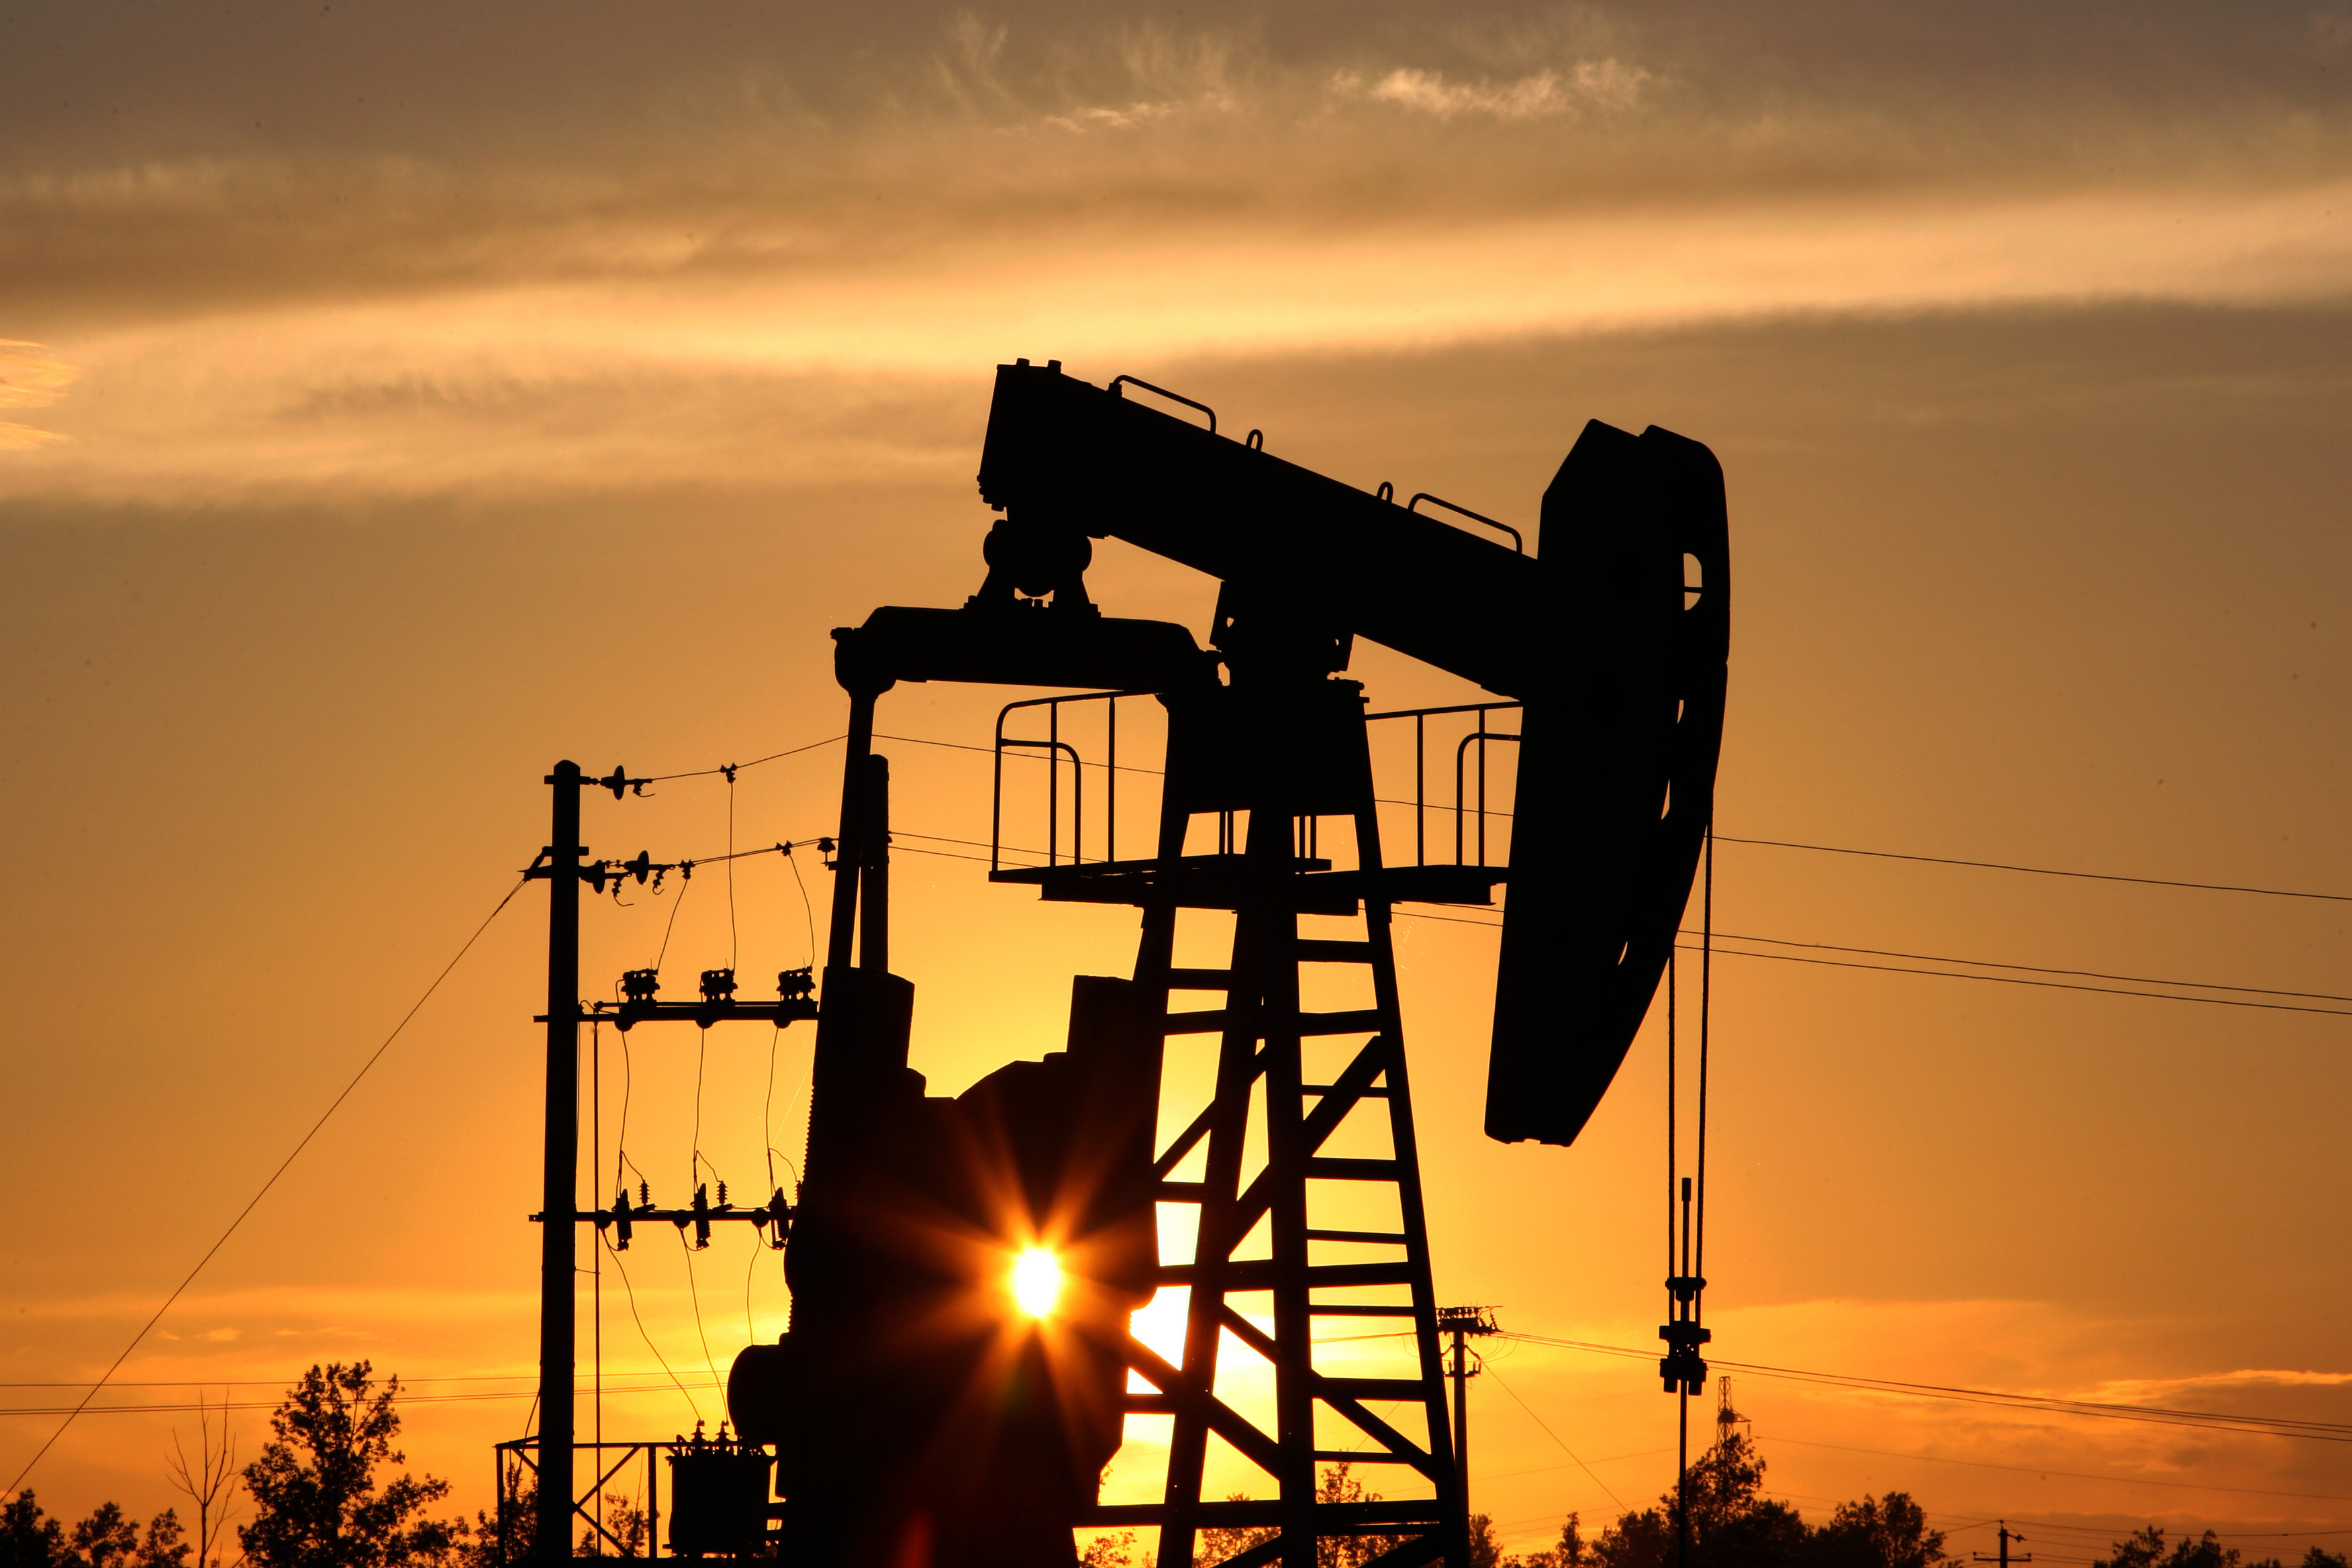 A CNPC 'nodding donkey' oil pump is seen at sunset in an oilfield outside Daqing, Heilongjiang province, China. (Lucas Schifres—Pictobank/Getty Images)